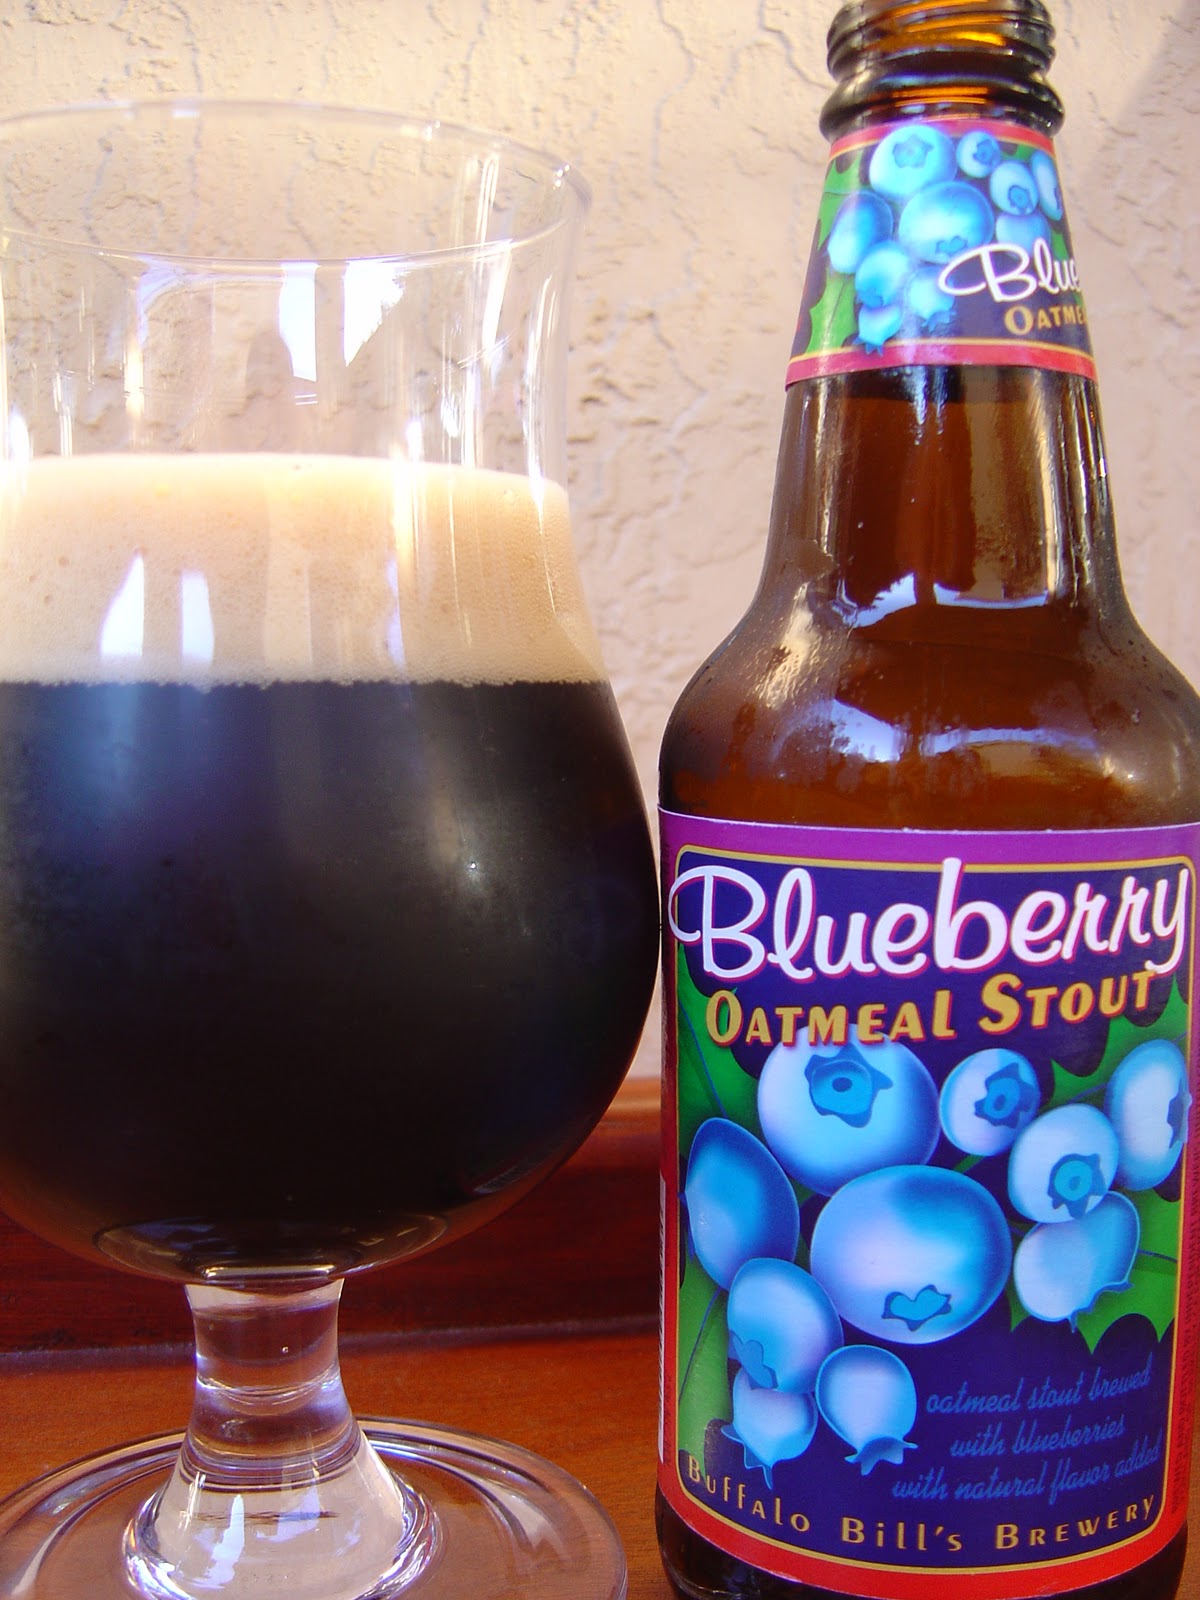 Daily Beer Review: Buffalo Bill's Blueberry Oatmeal Stout